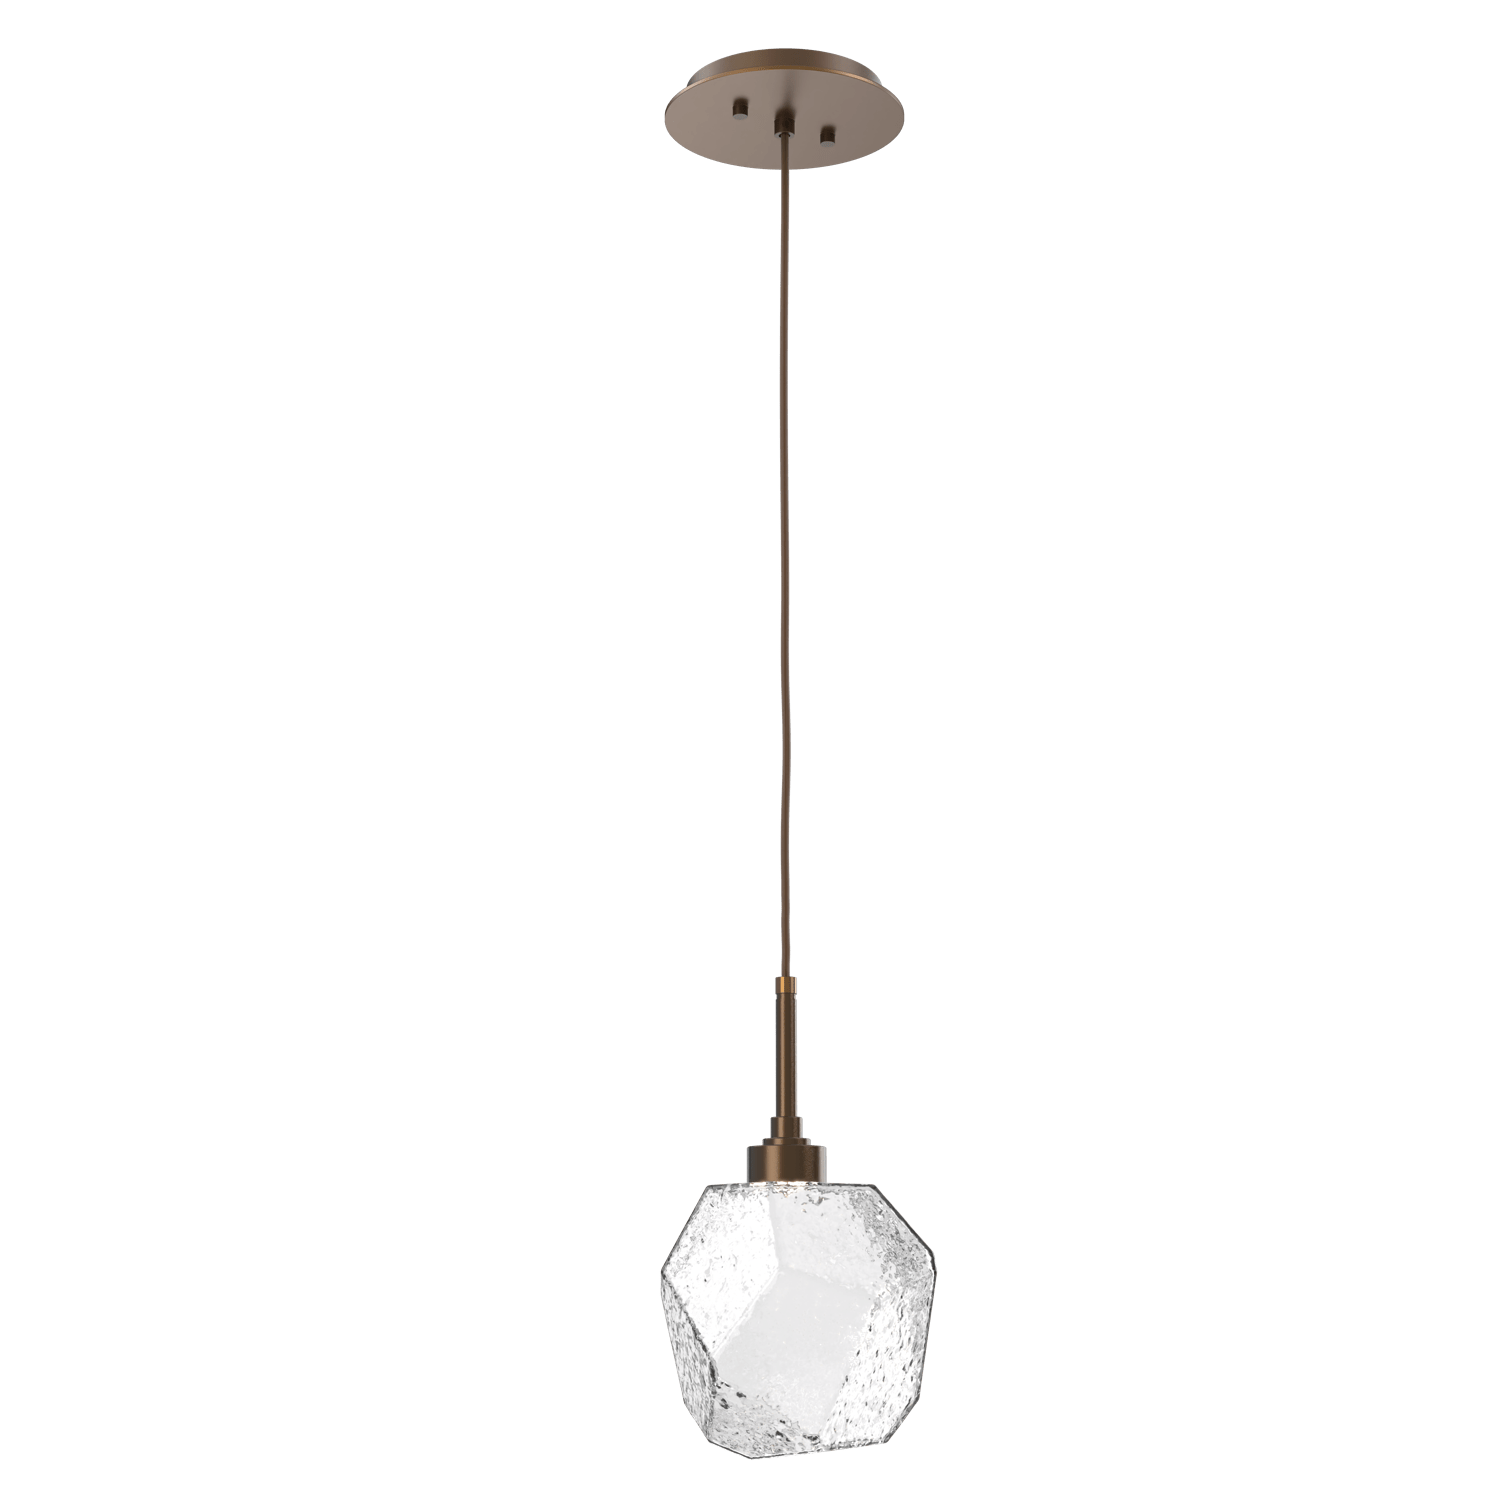 LAB0039-01-FB-C-Hammerton-Studio-Gem-pendant-light-with-flat-bronze-finish-and-clear-blown-glass-shades-and-LED-lamping